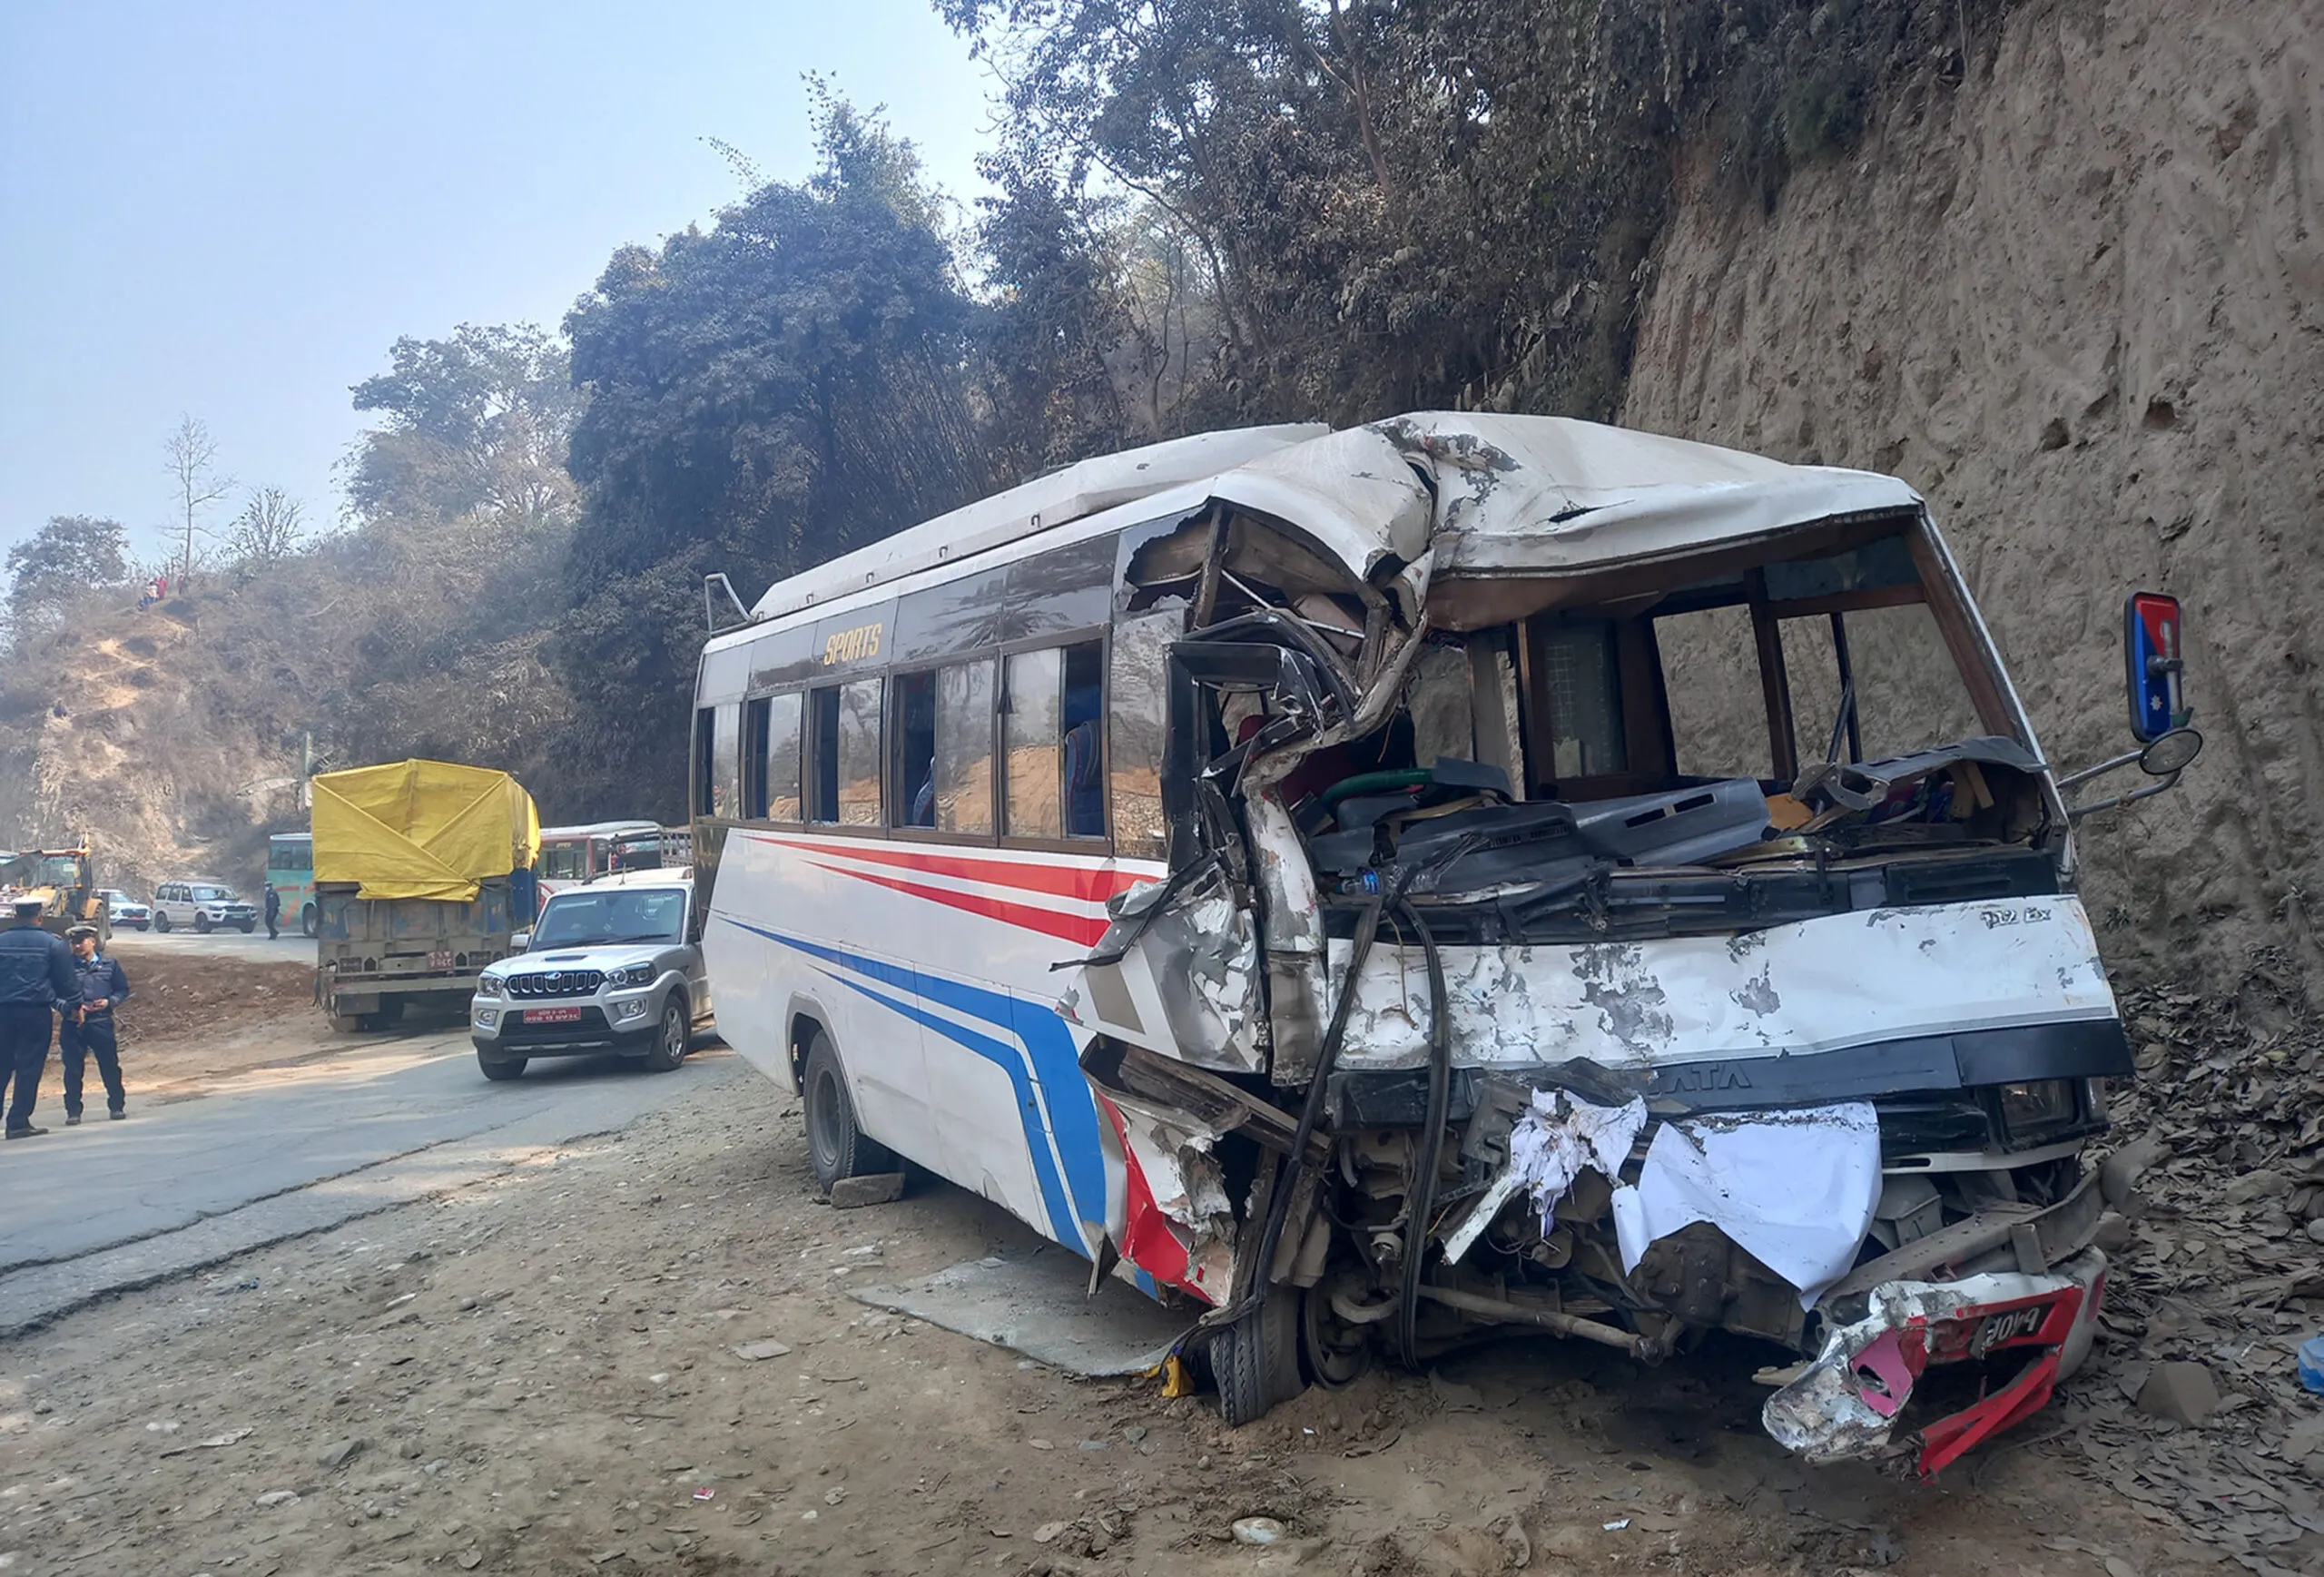 20 injured in bus and truck collision near Malekhu, three in critical condition